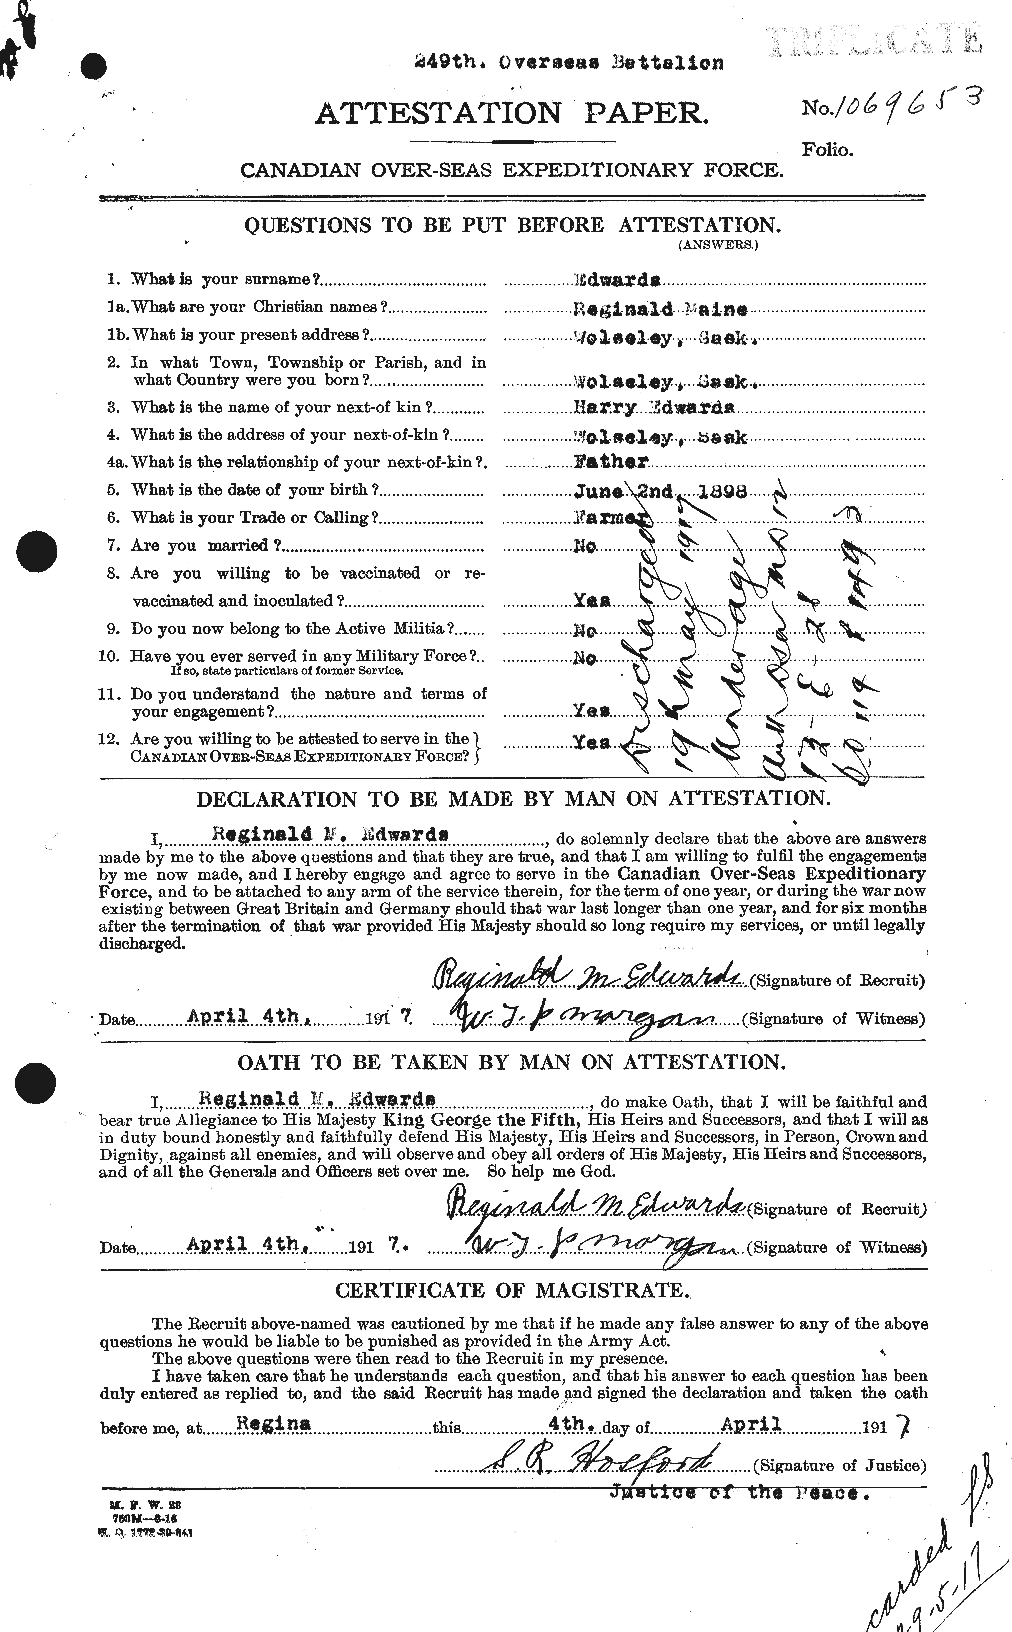 Personnel Records of the First World War - CEF 310249a